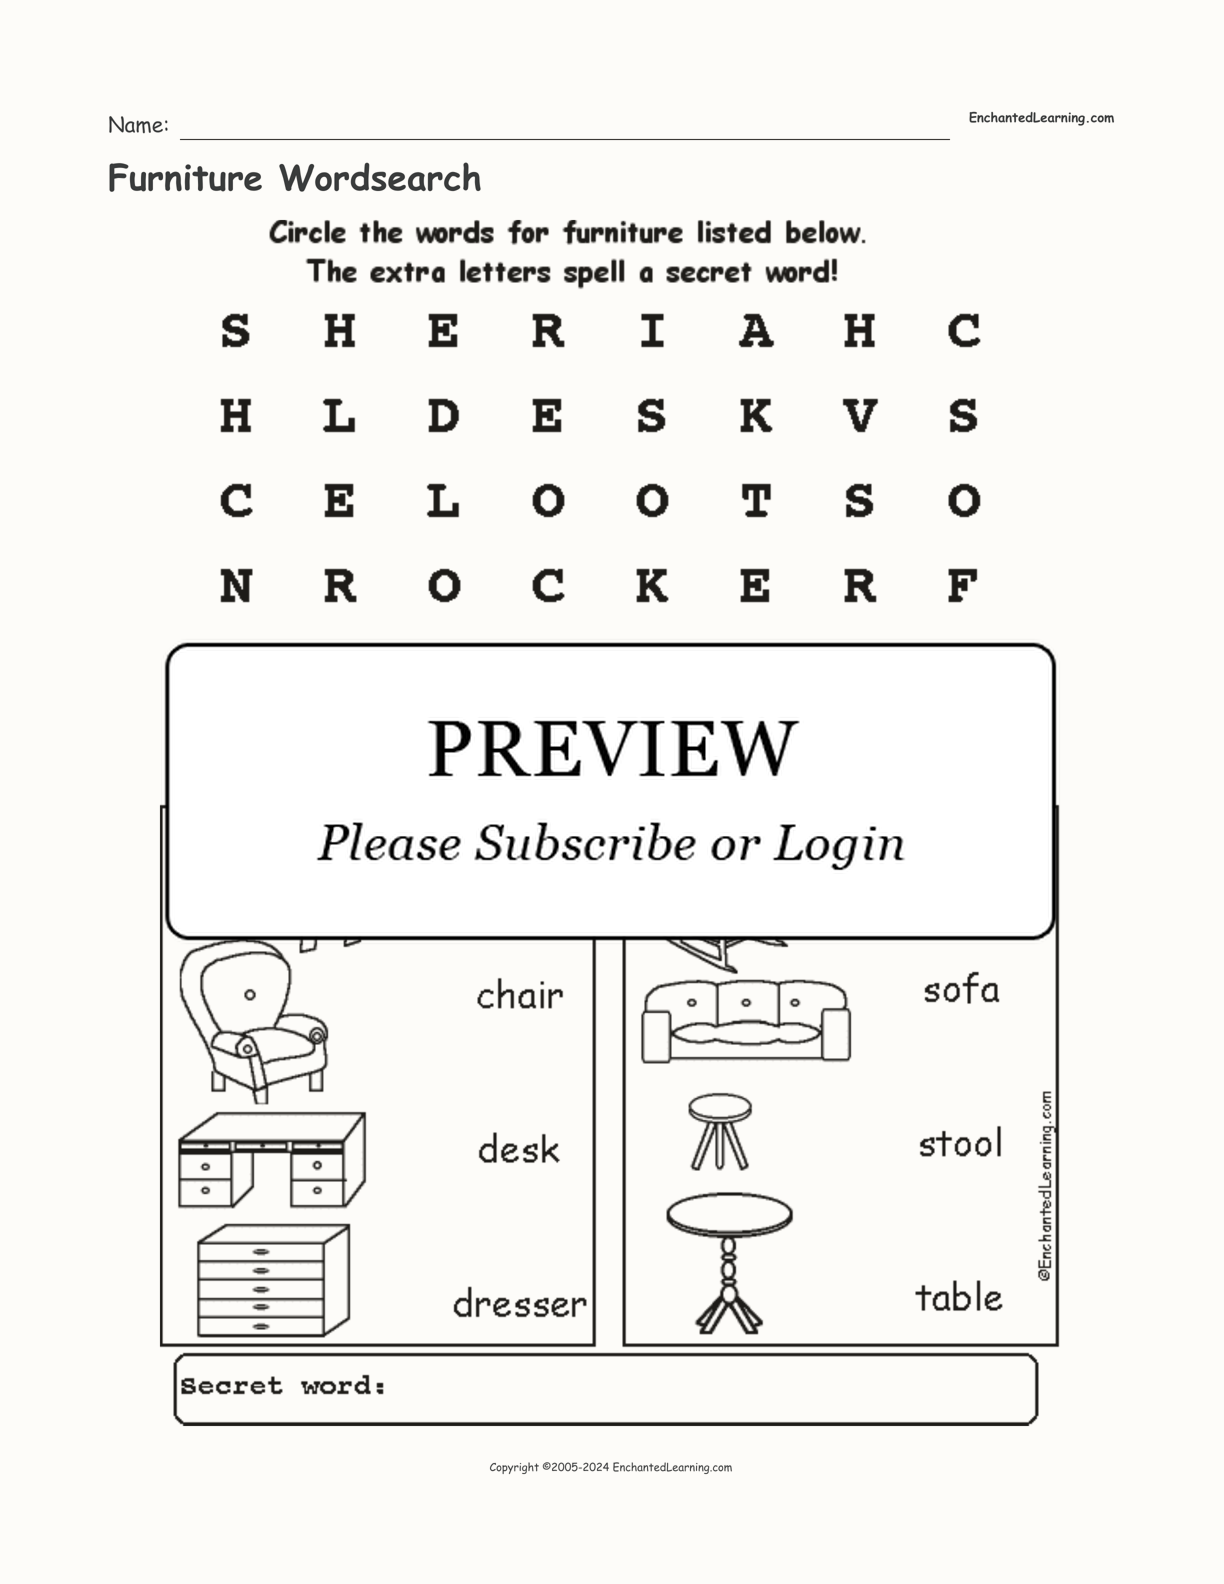 Furniture Wordsearch interactive worksheet page 1